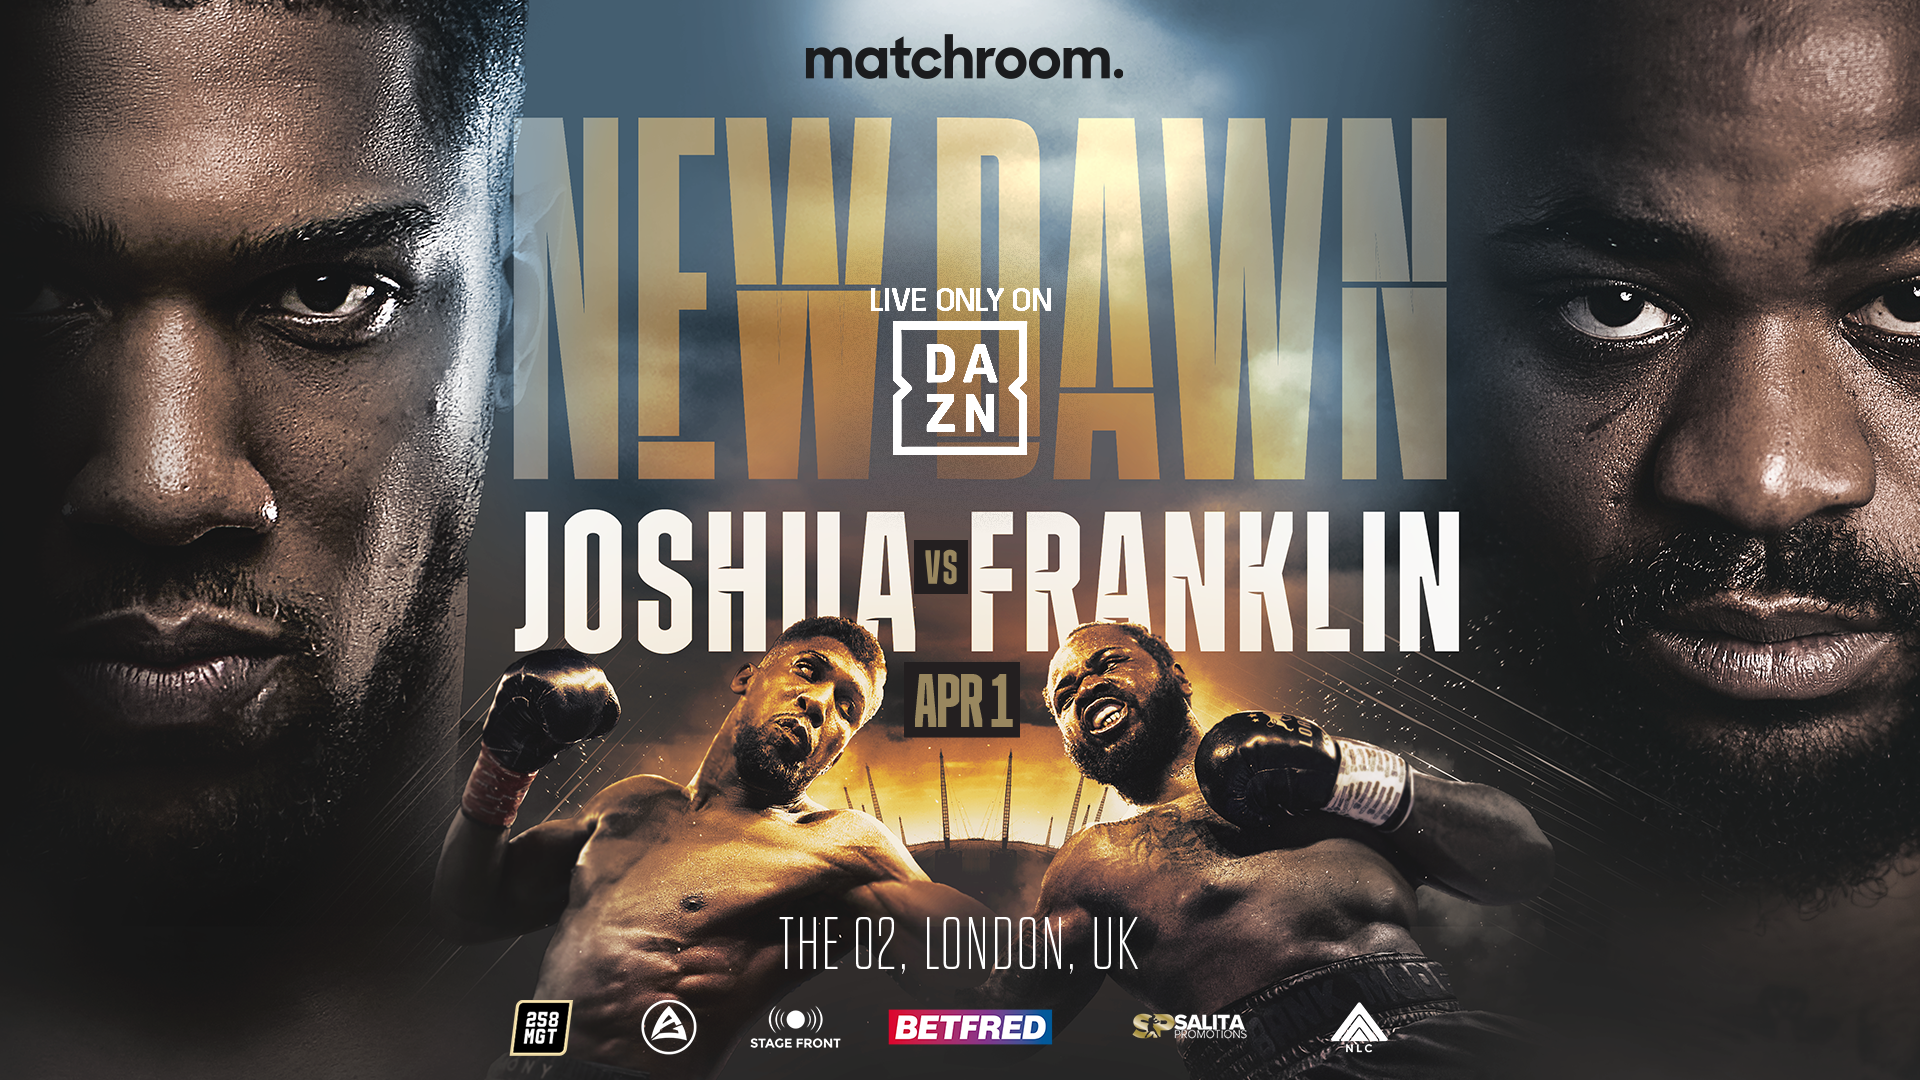 ANTHONY JOSHUA RETURNS TO FIGHT JERMAINE FRANKLIN APRIL 1 IN BLOCKBUSTER BOUT TO BE INCLUDED IN DAZN SUBSCRIPTION